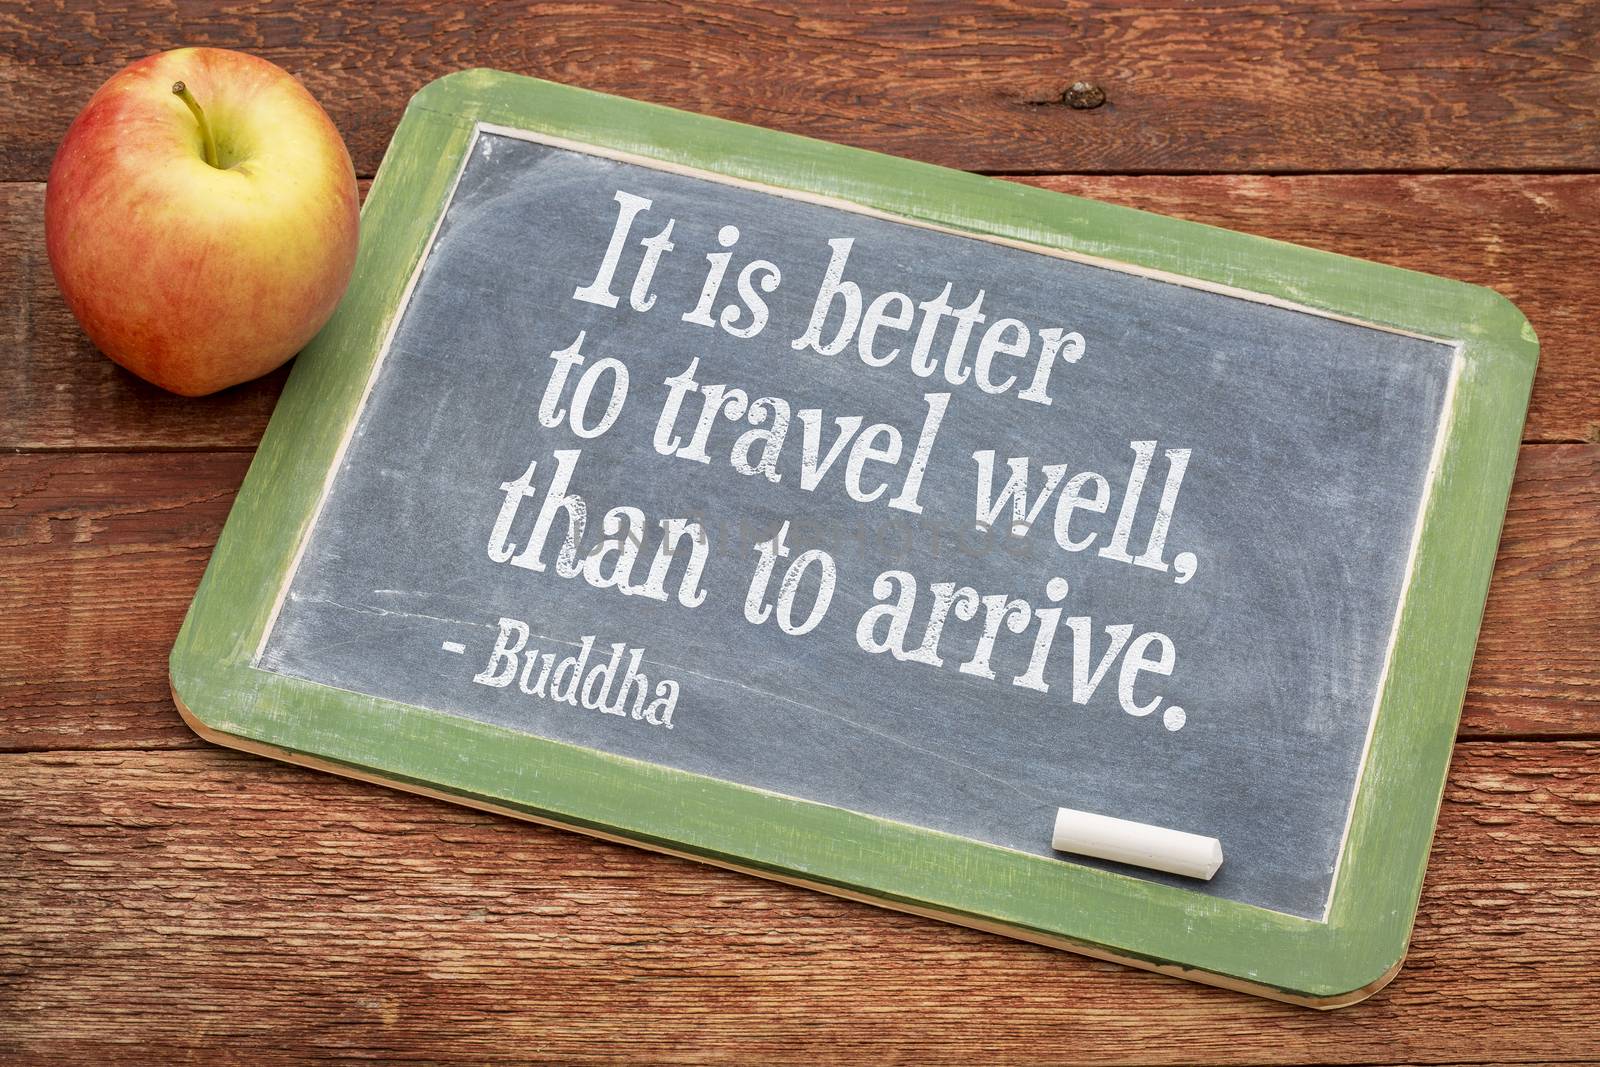 Buddha quote on travel and life by PixelsAway